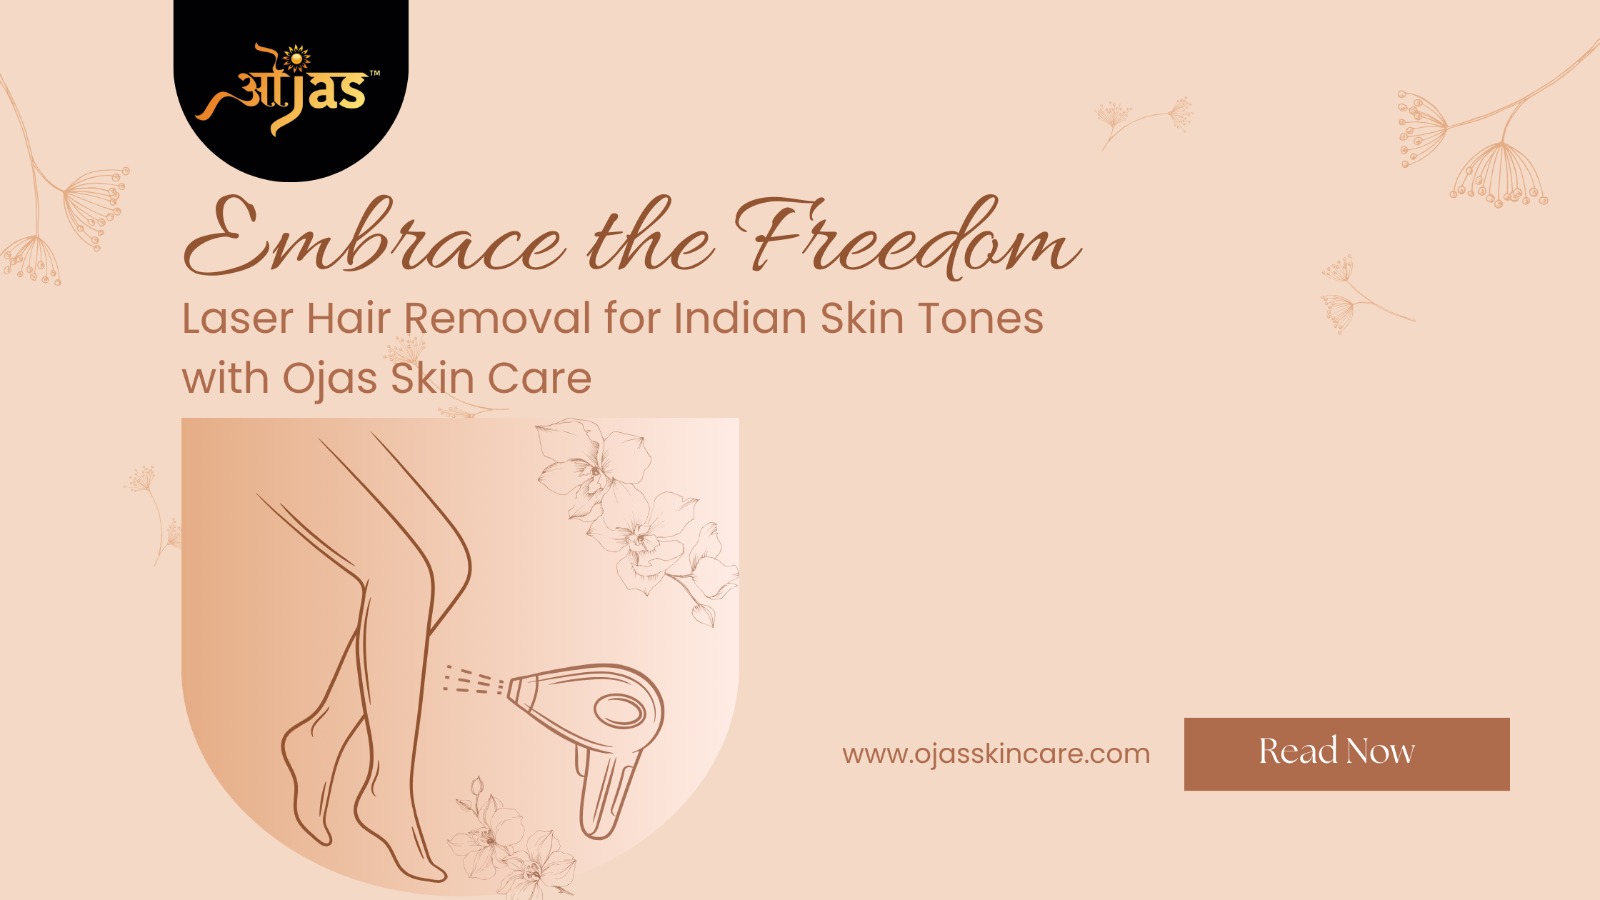 Embrace the Freedom: Laser Hair Reduction for Indian Skin tone with Ojas Skin Care